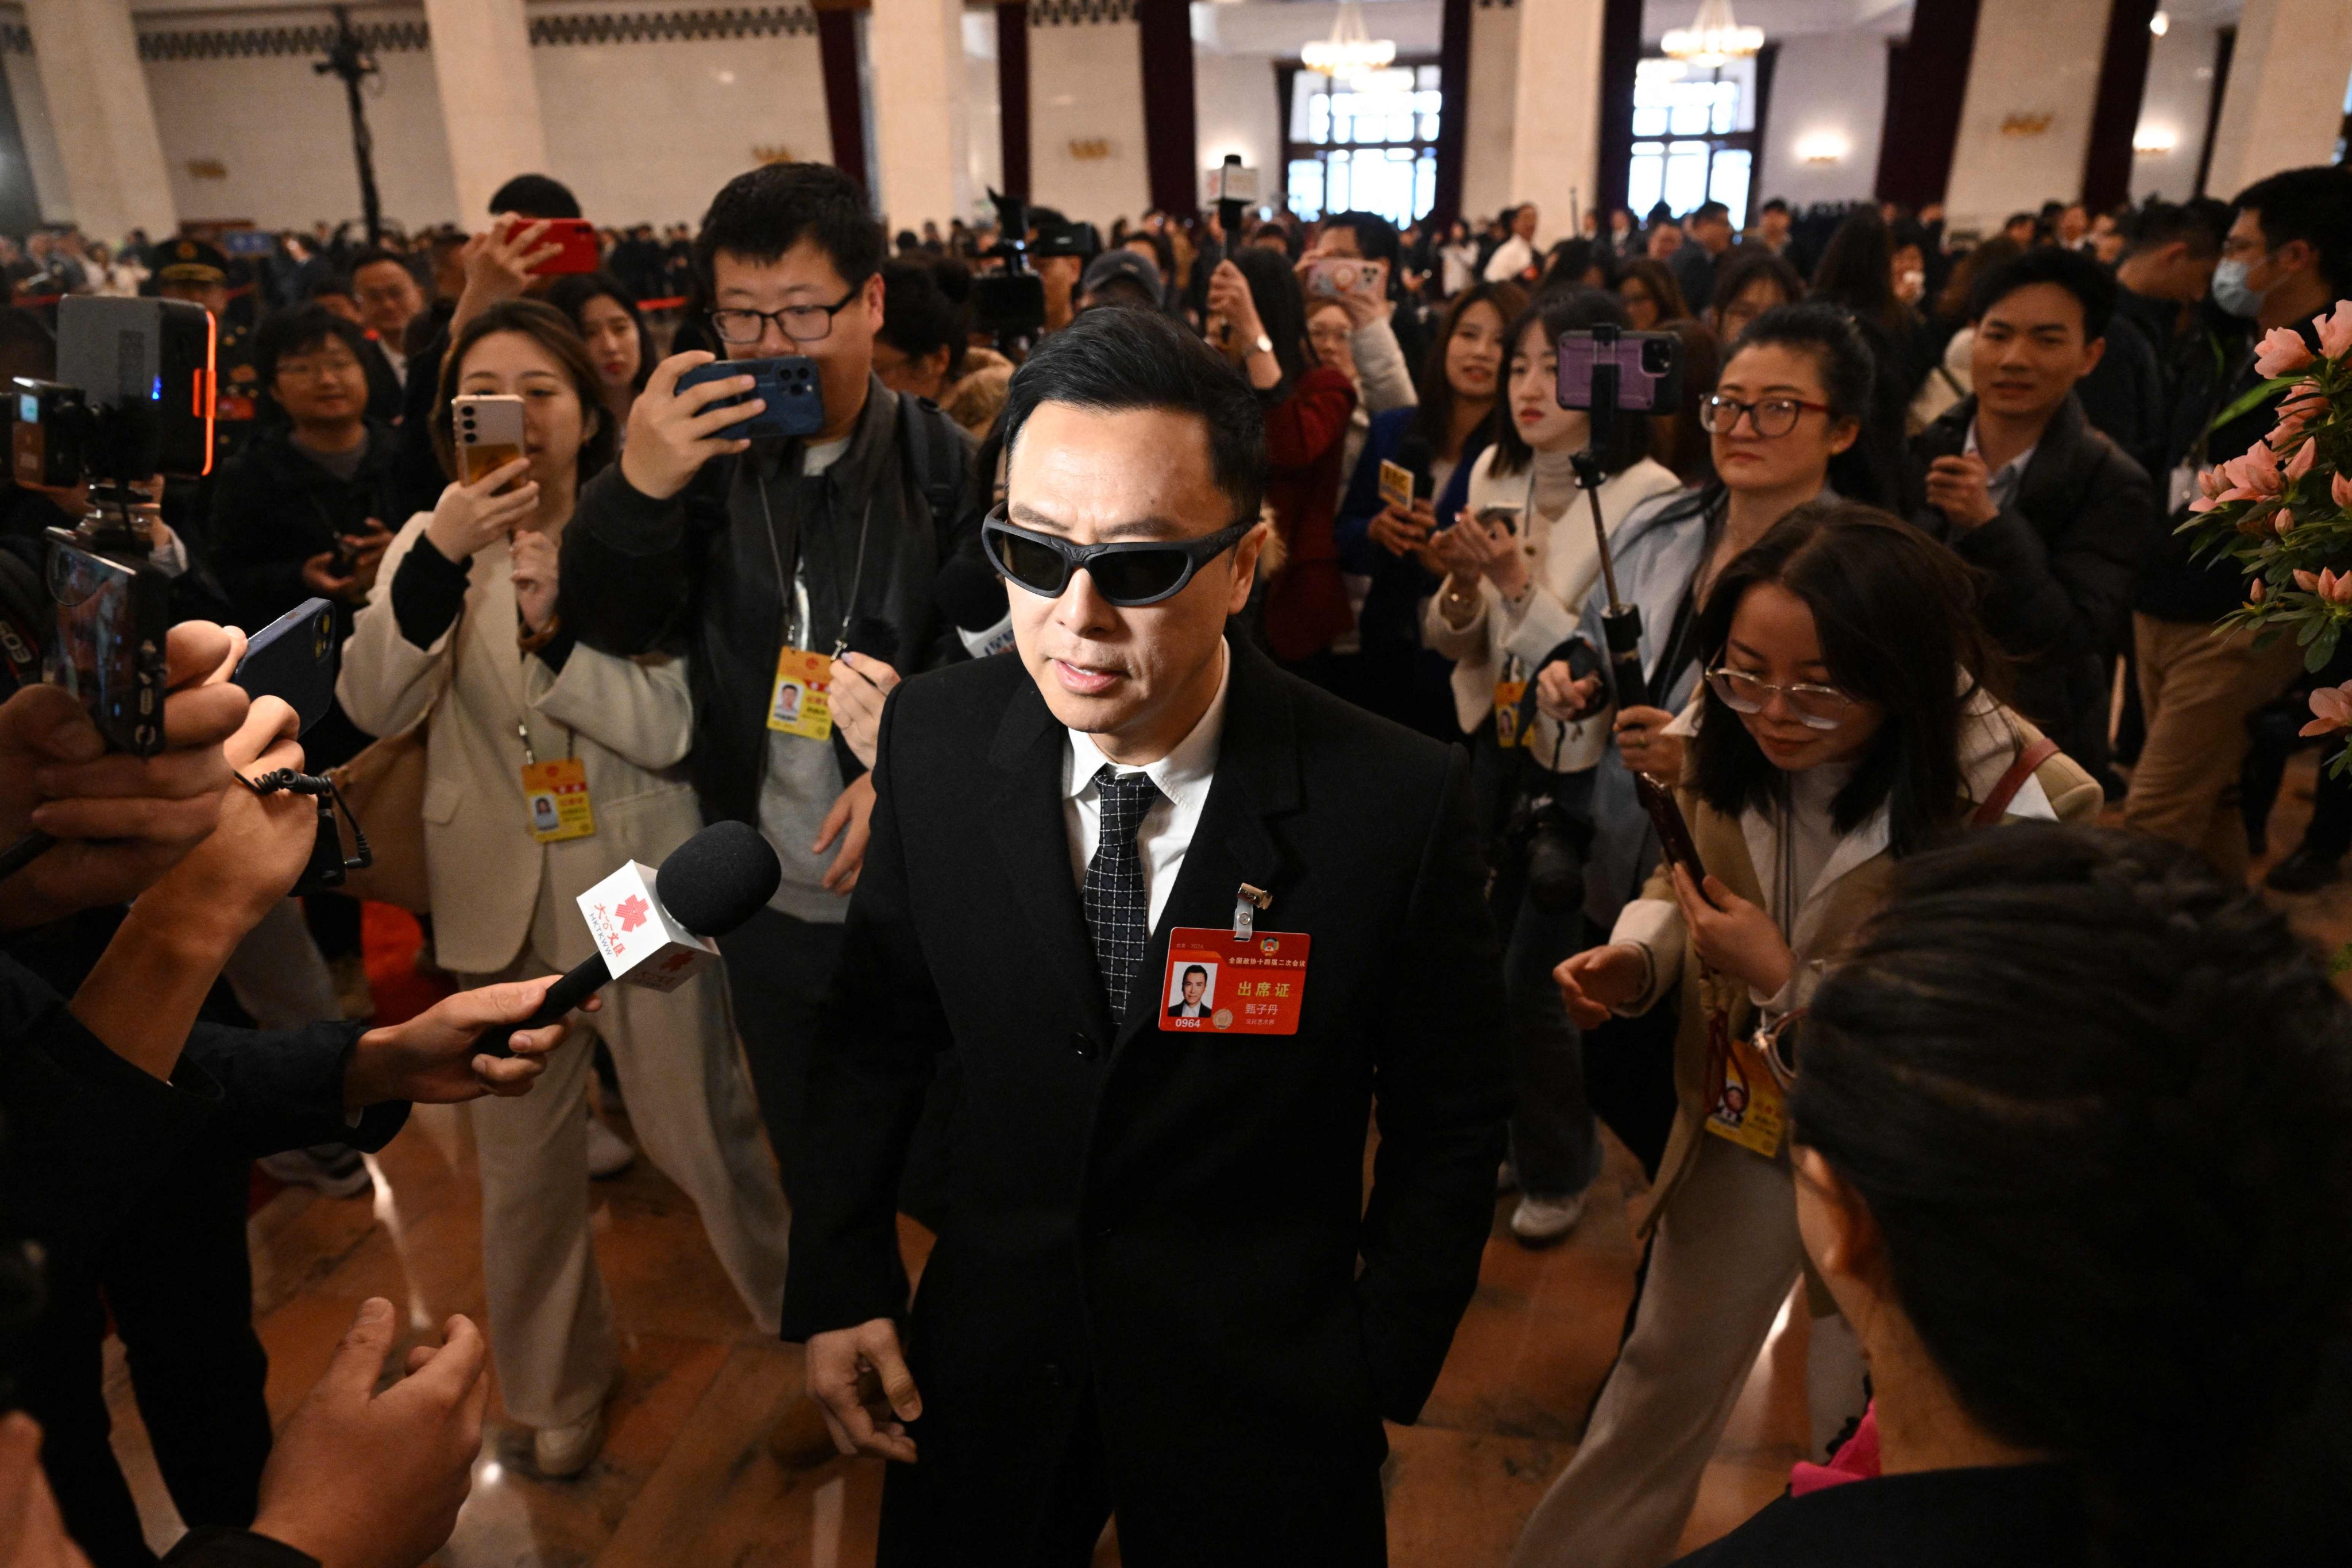 Hong Kong actor Donnie Yen featured in the fictitious article promoting financial investment apps. Photo: AFP